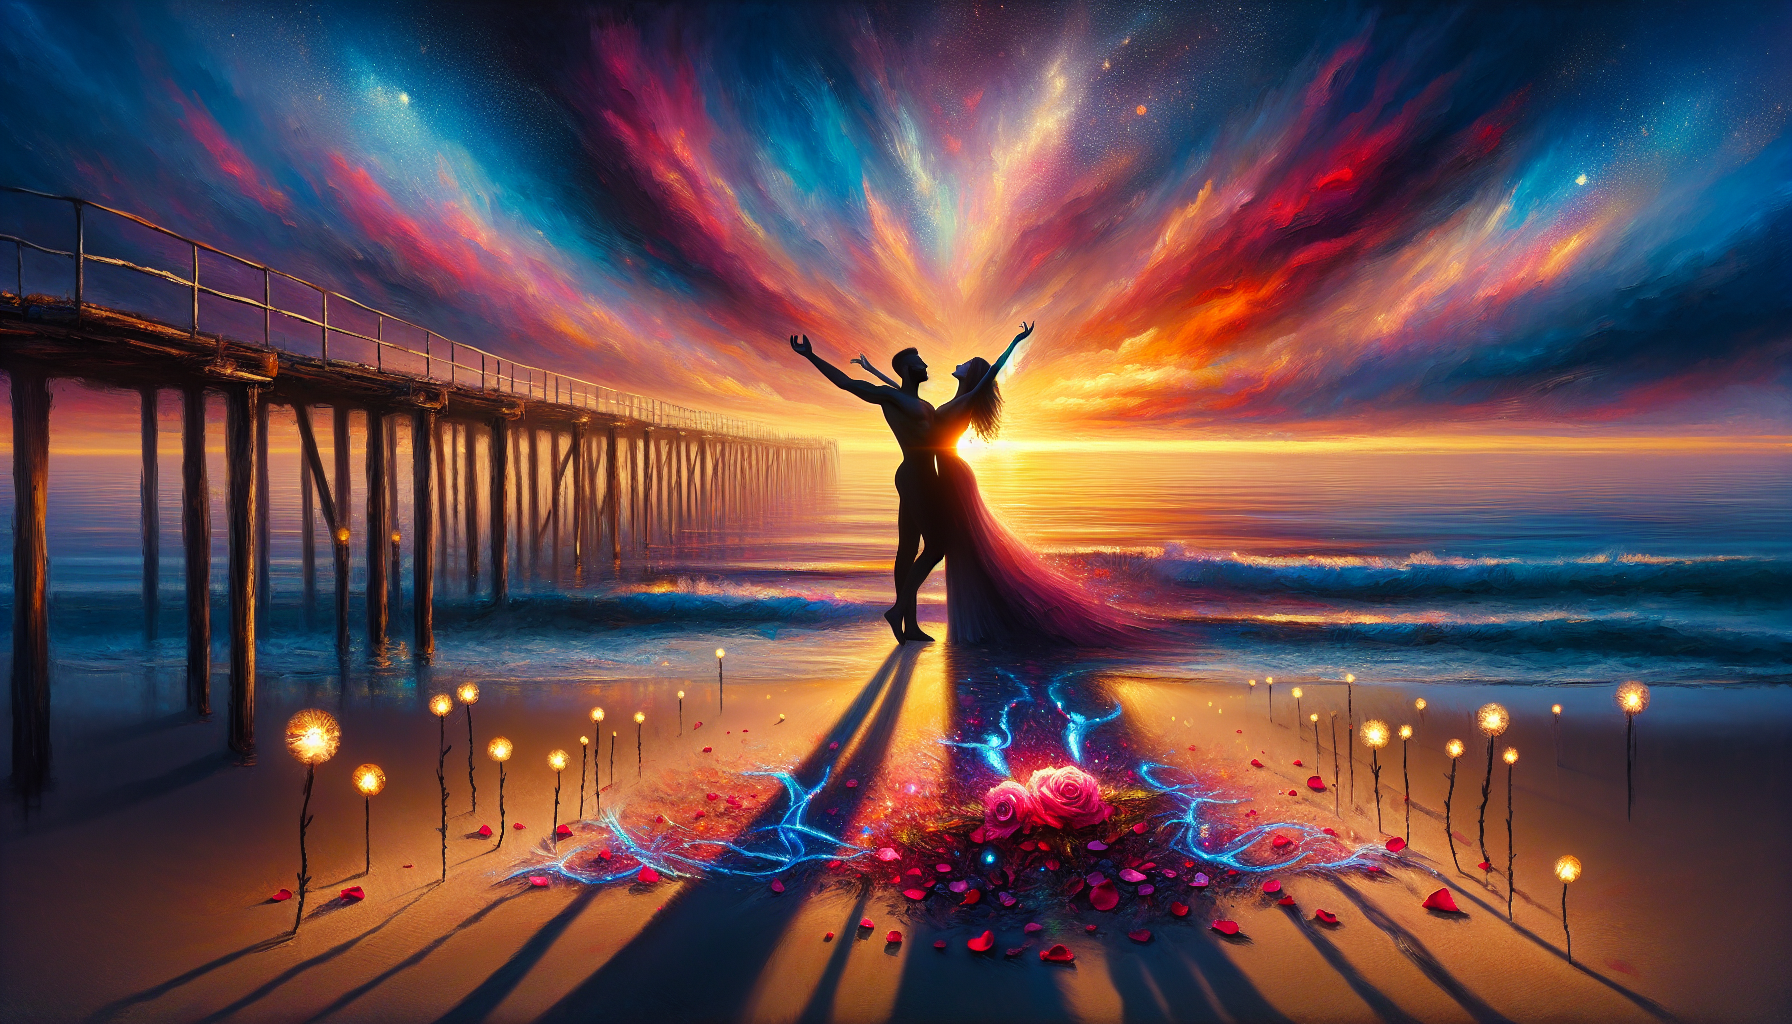 An enchantingly painted sunset over a picturesque beach where a diverse, joyful couple joyfully embraces, their silhouettes casting long shadows on the sand, surrounded by scattered rose petals and tw